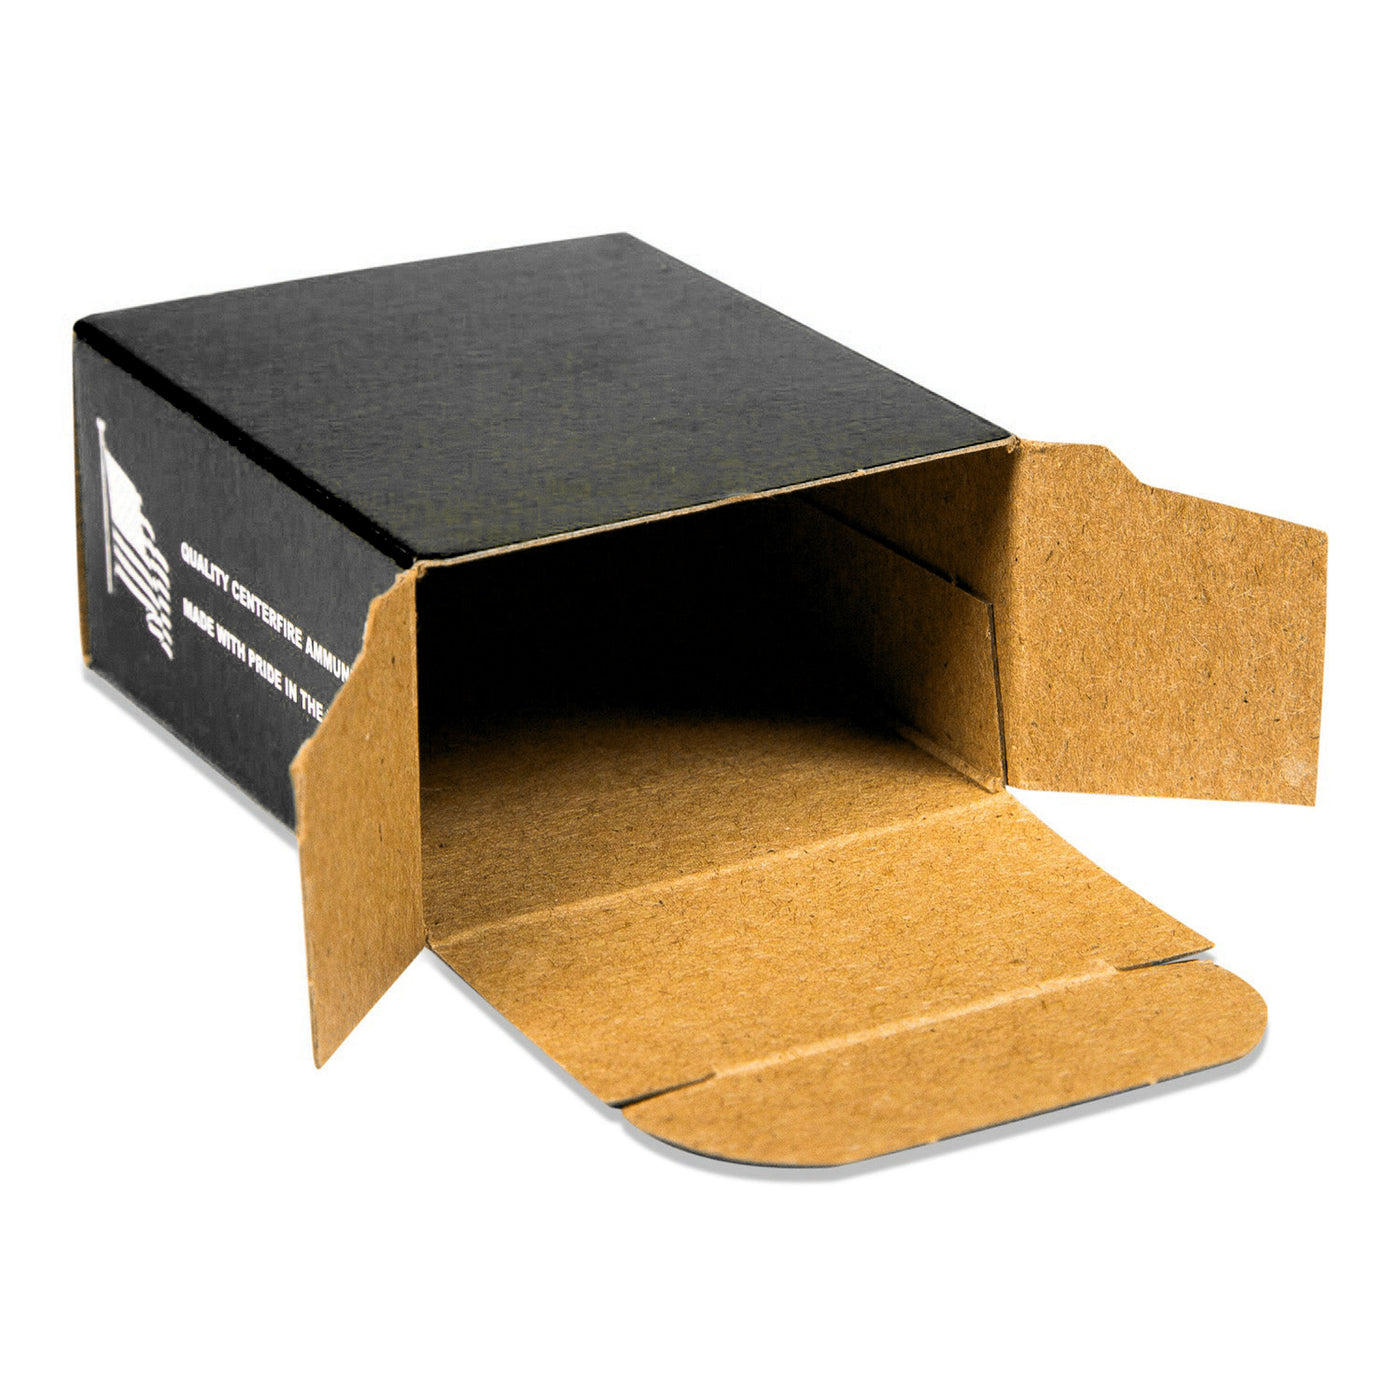 01 Cardboard Ammo Box for .380, 9mm, or .38 Super – Top Brass